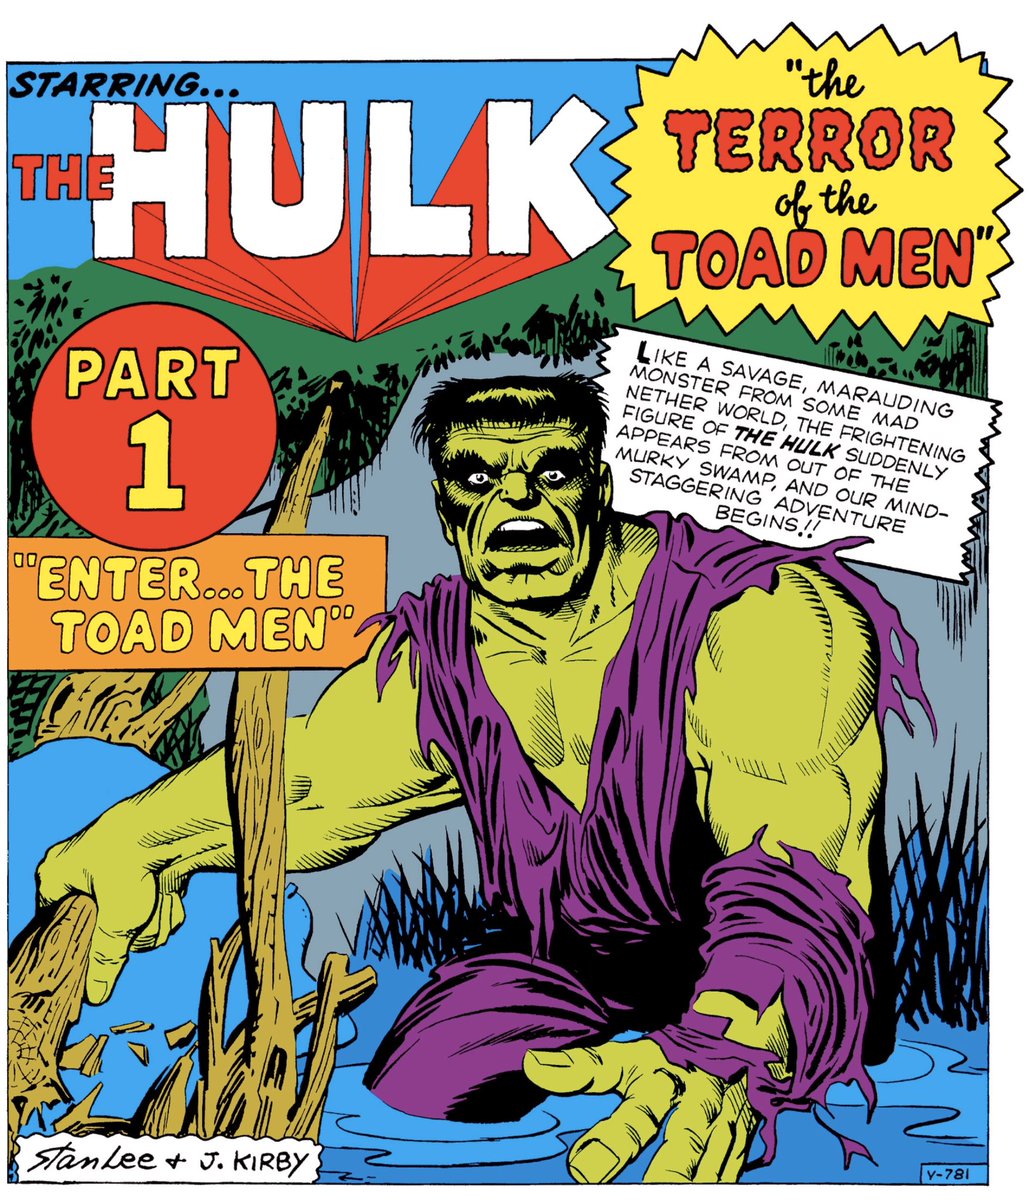 ...for starters, the Hulk’s character was very inconsistent across his first 6-issues. He starts out as gray and only transforms at night, next iss Hulk is green, next iss Bruce is stuck as a mindless Hulk during the day controlled by Rick Jones commands...